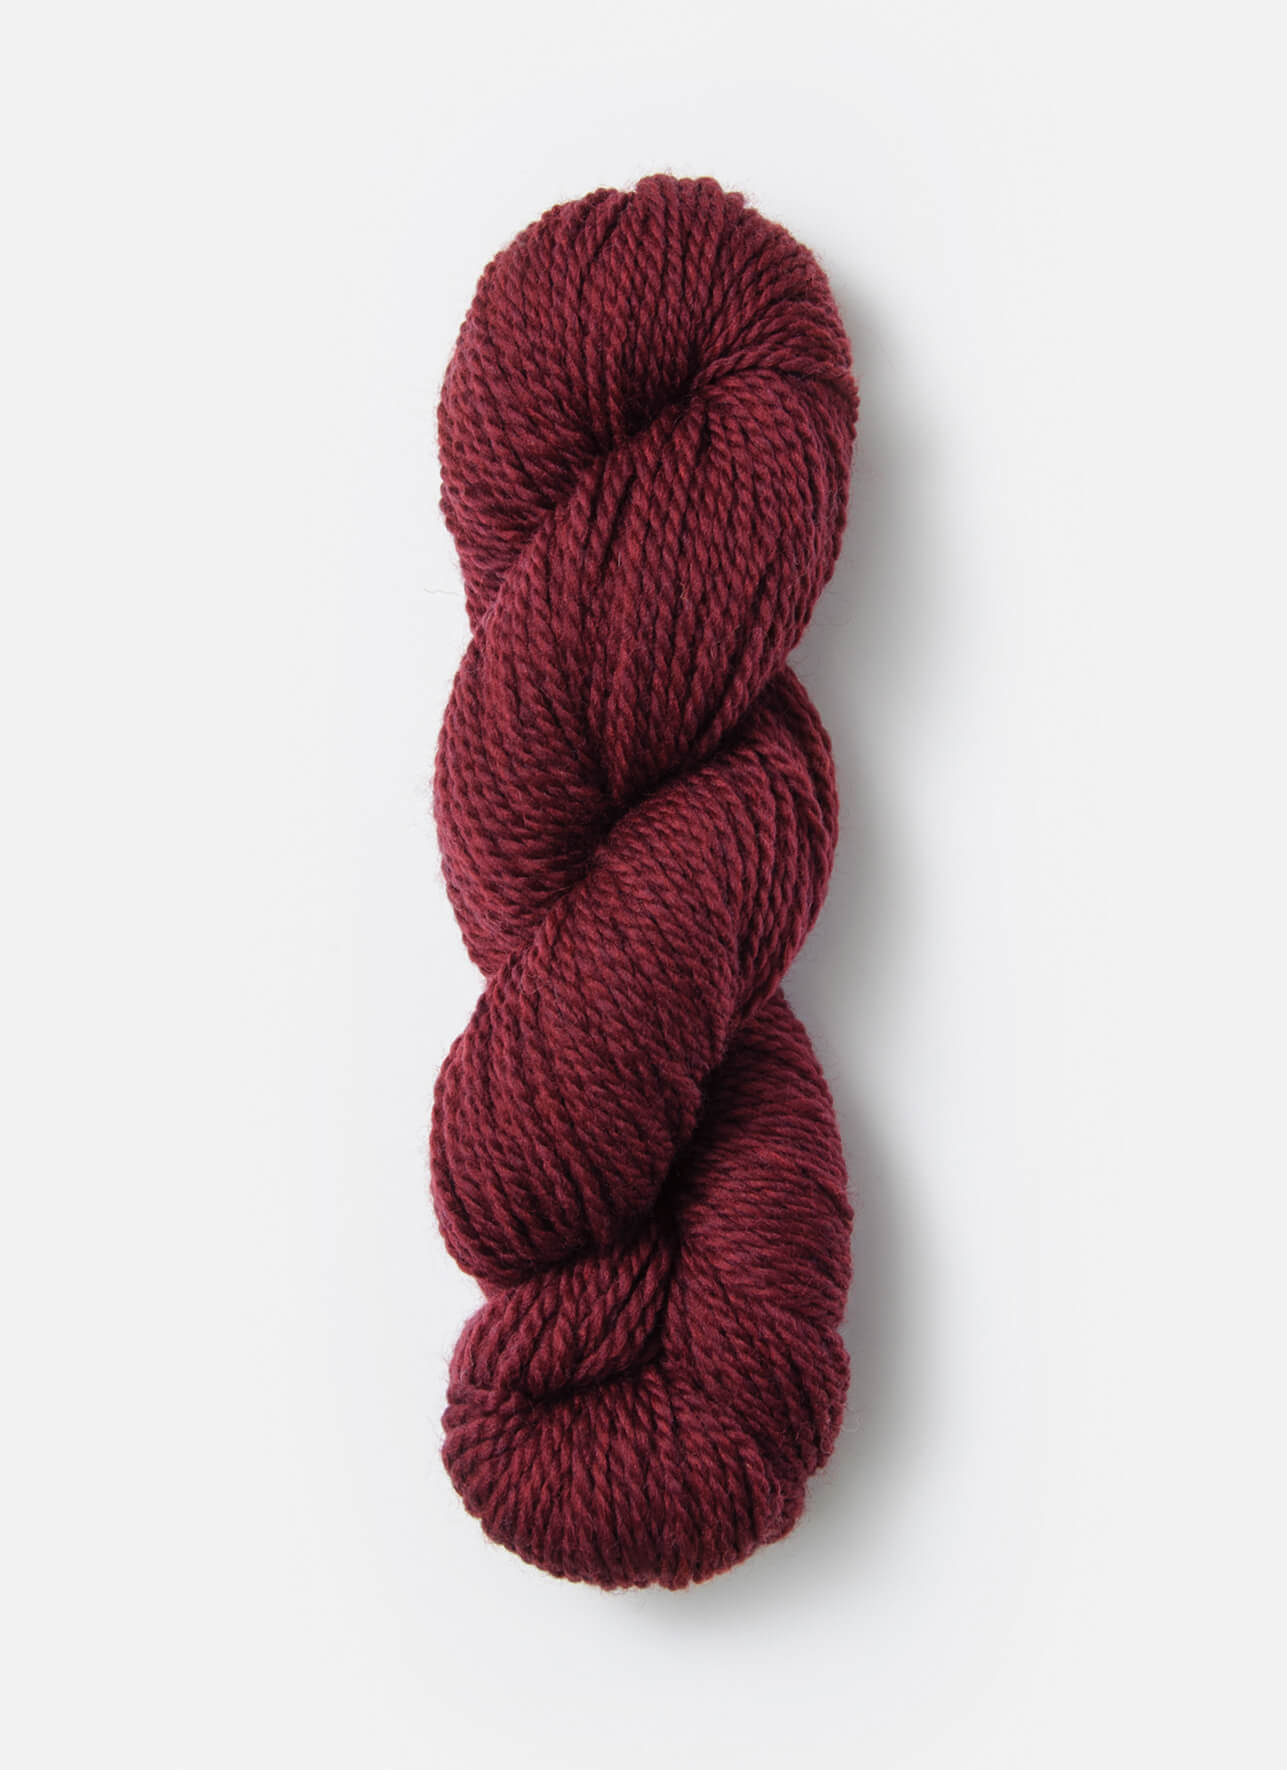 Blue Sky Fibers - Woolstok - Cranberry Compote (50g)